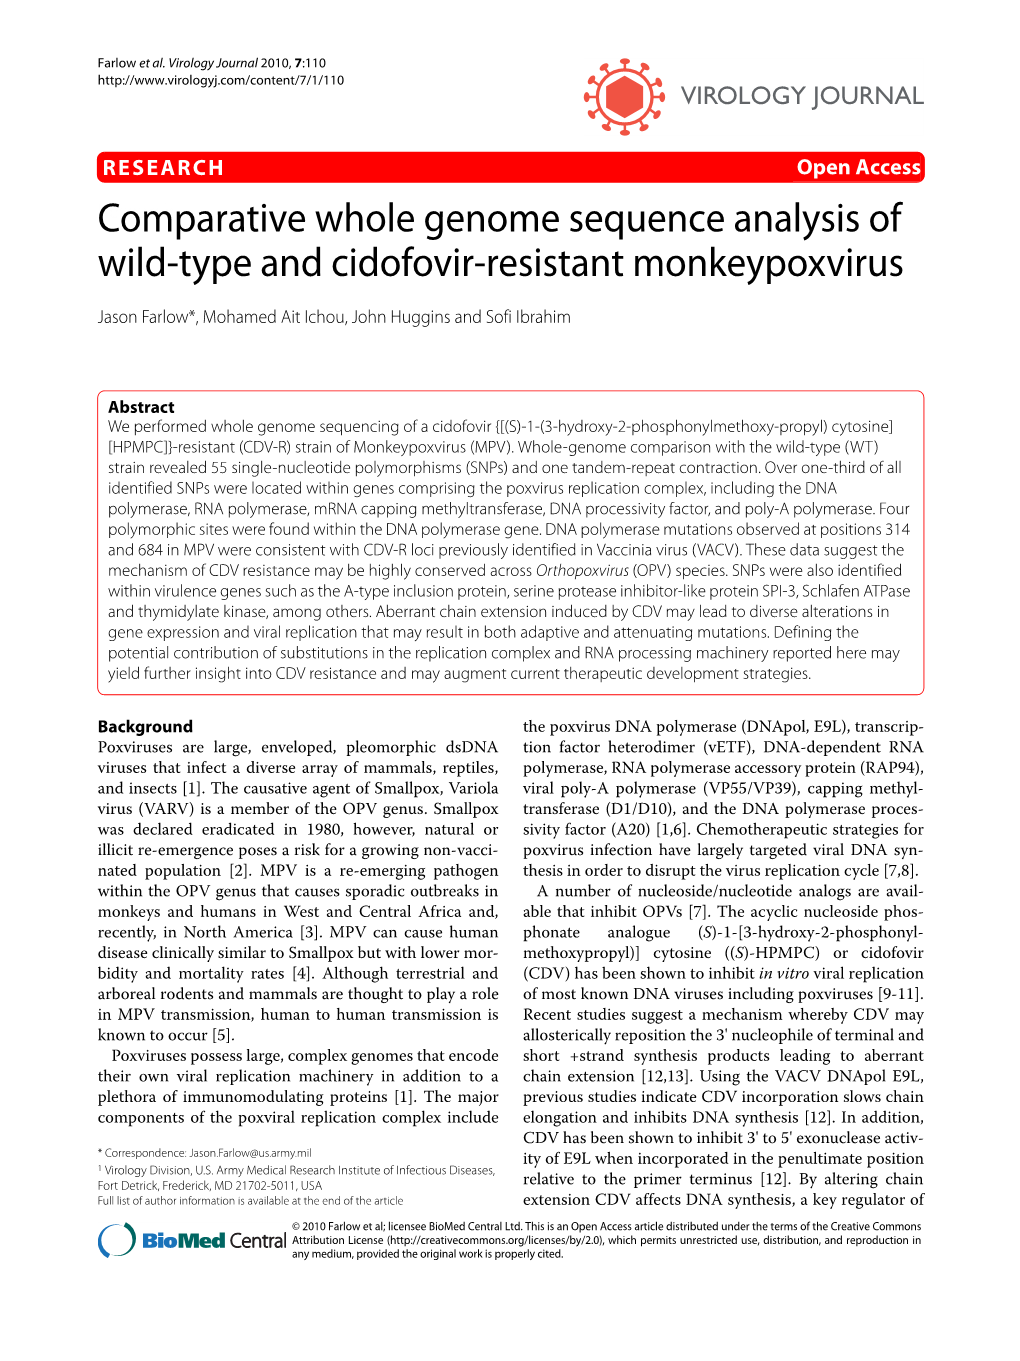 Research Comparative Whole Genome Sequence Analysis of Wild